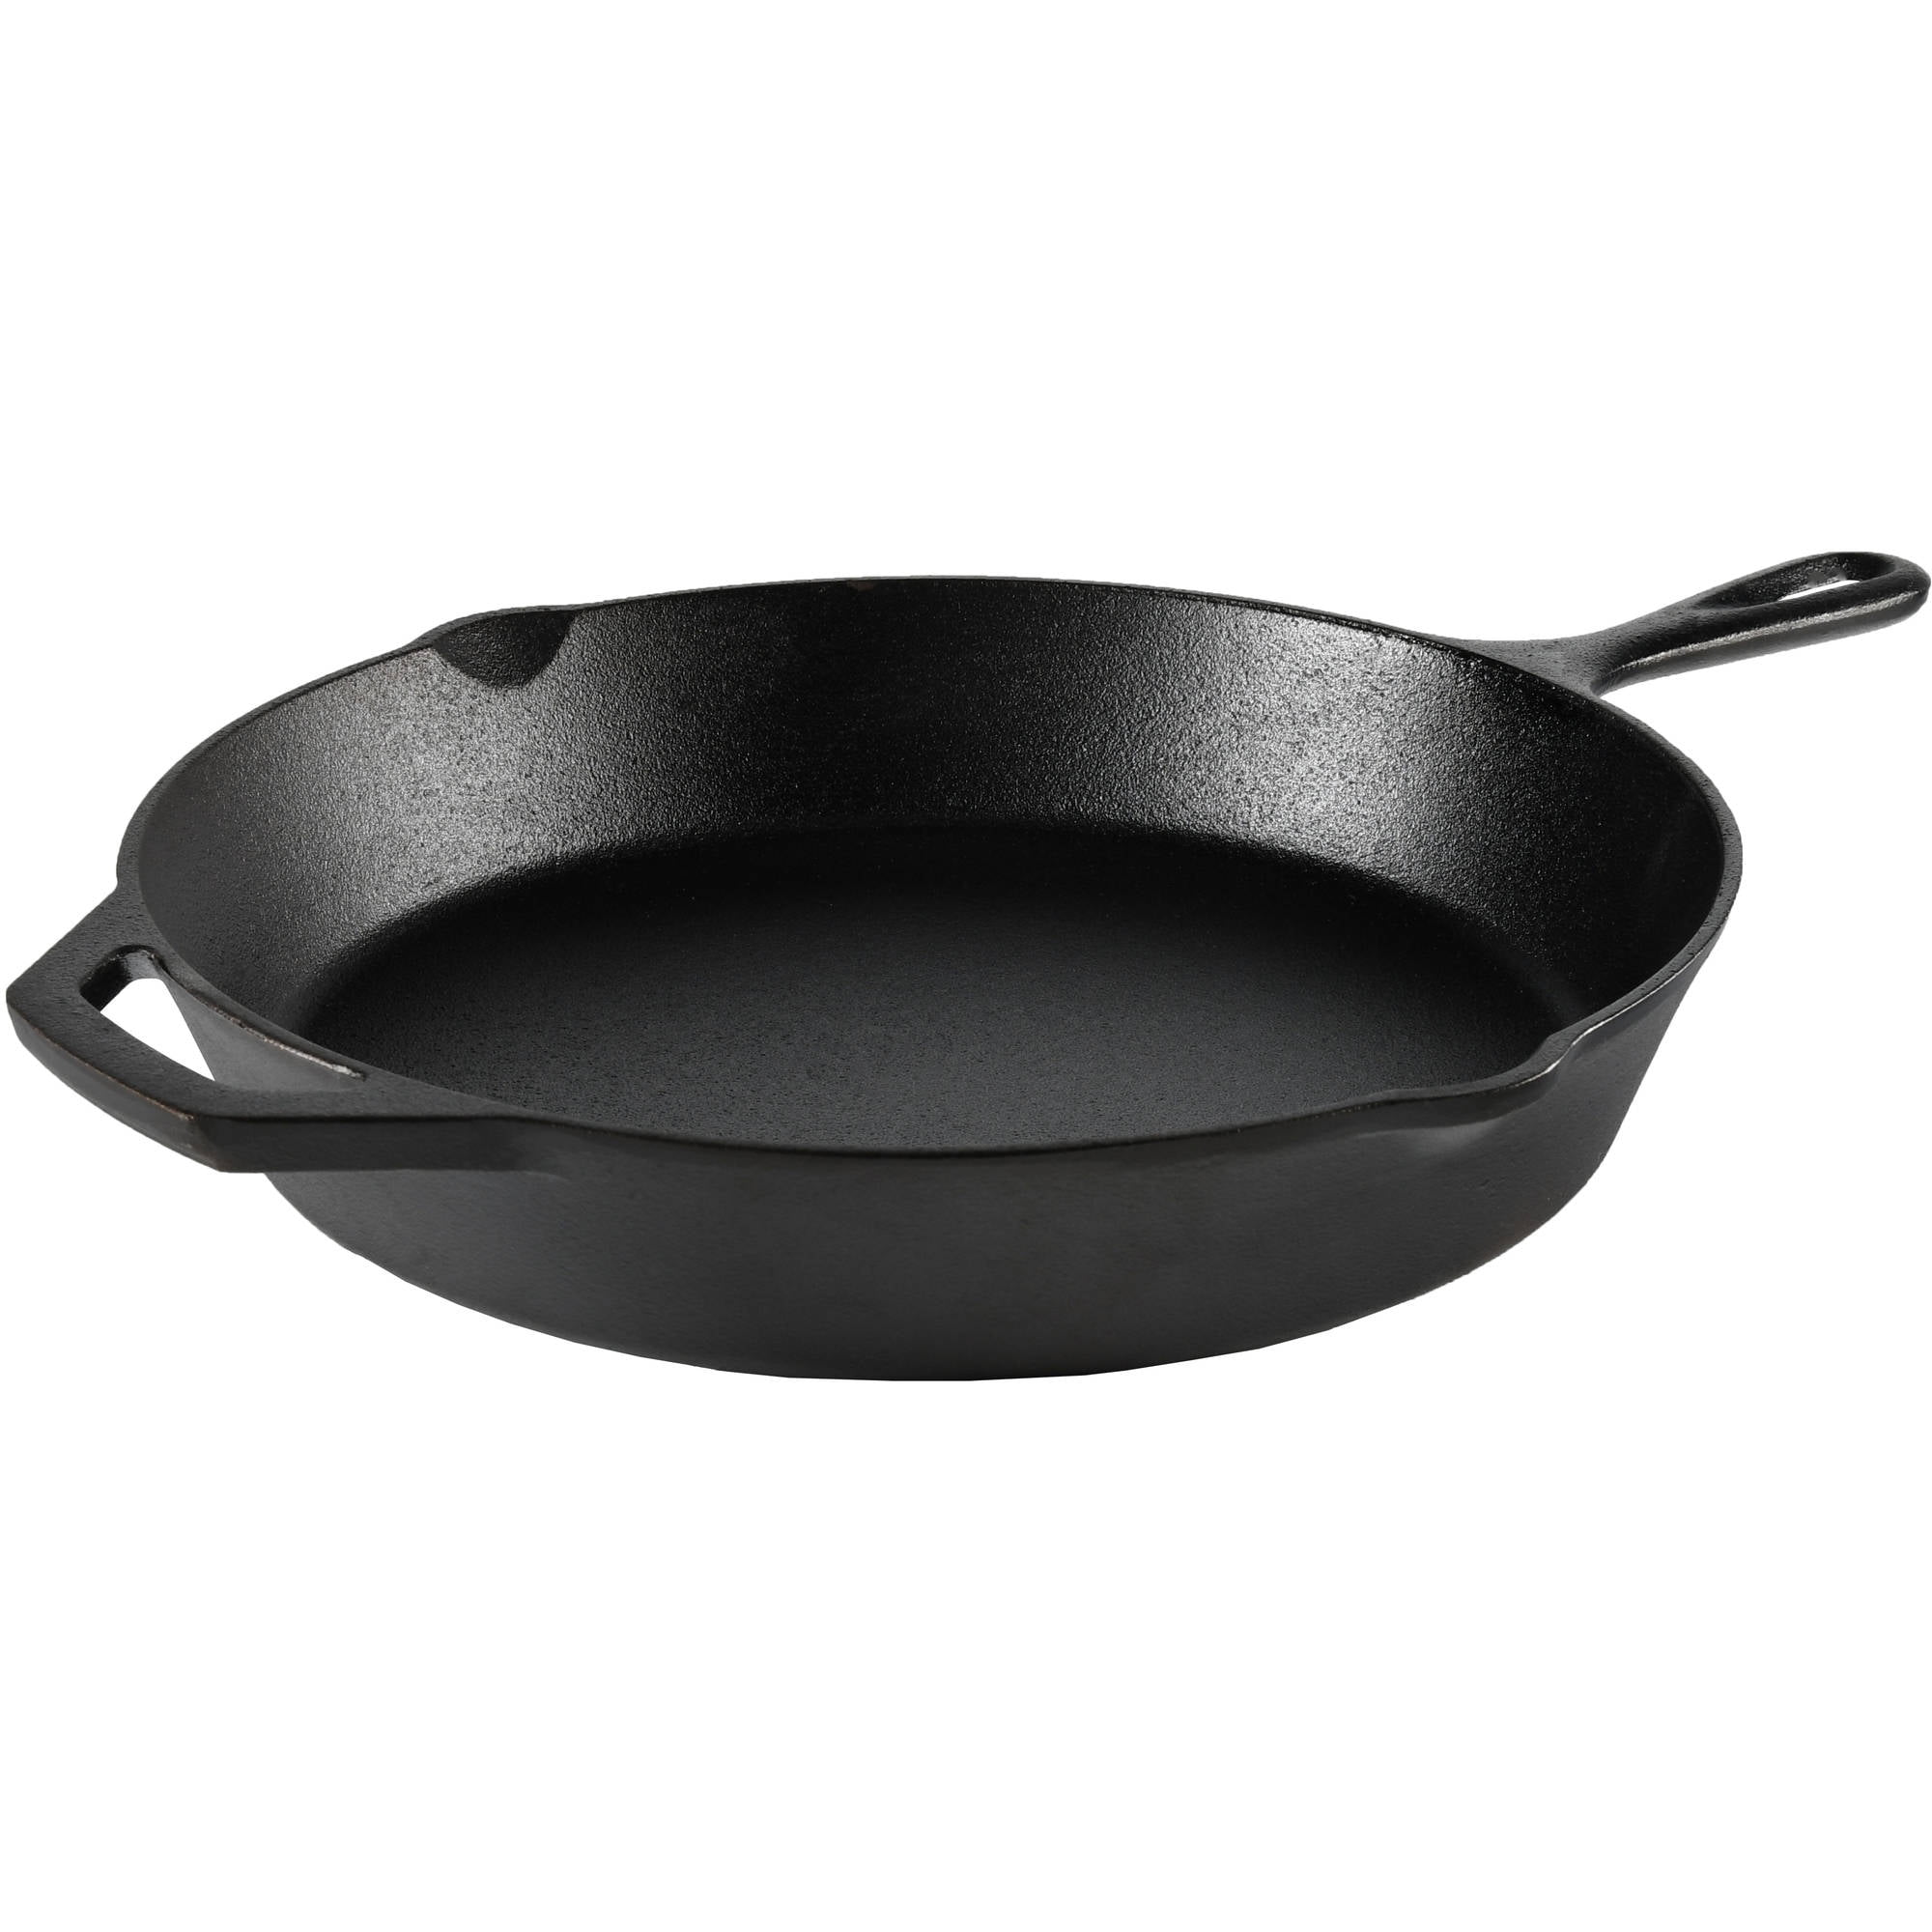 Ozark Trail Pre-seasoned 12" Cast Iron Skillet with Handle and Lips